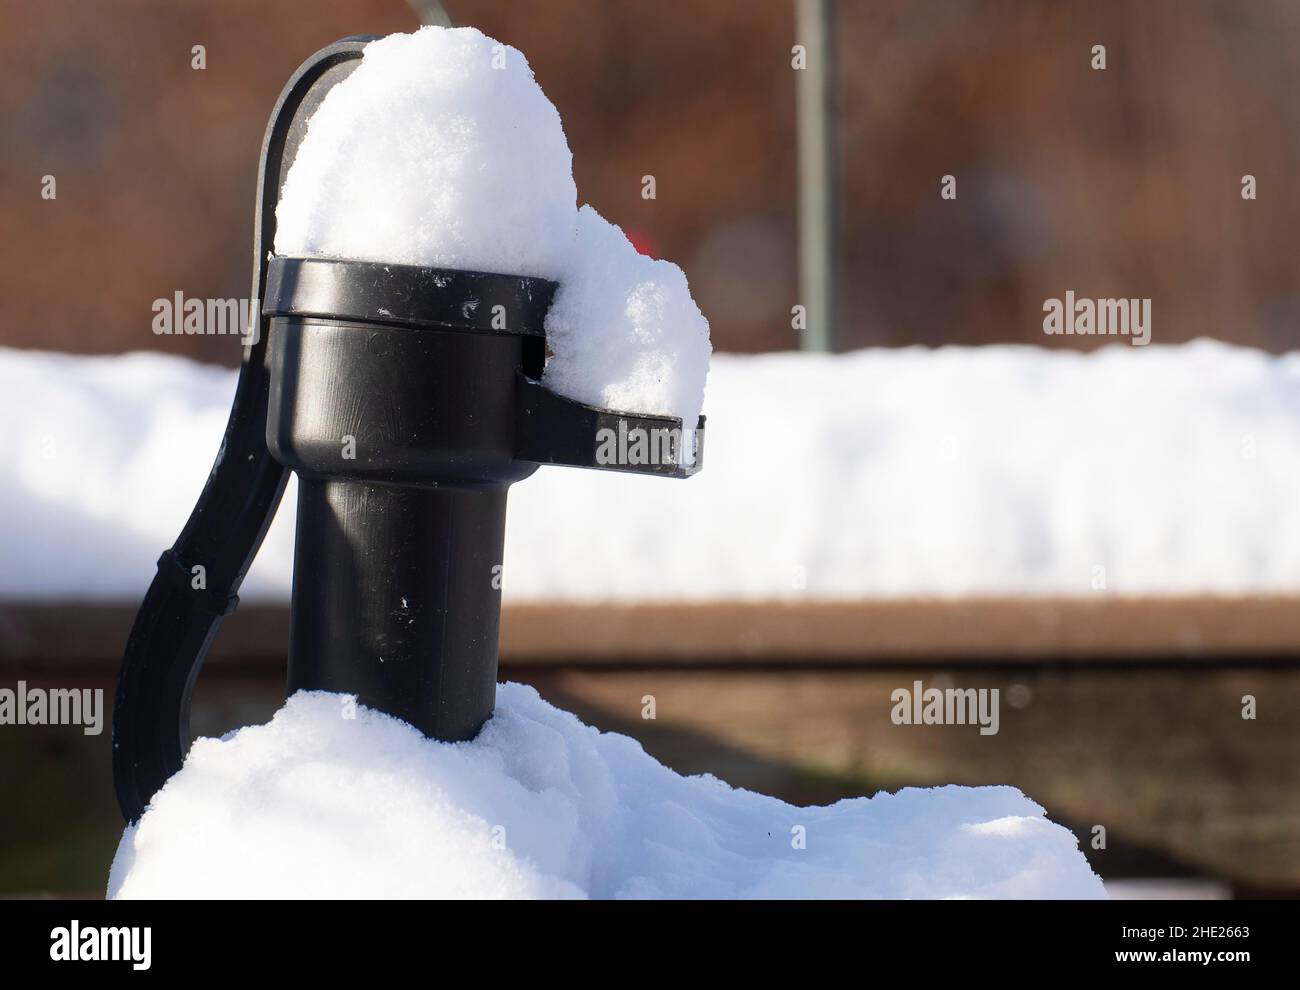 A water pump covered in snow Stock Photo